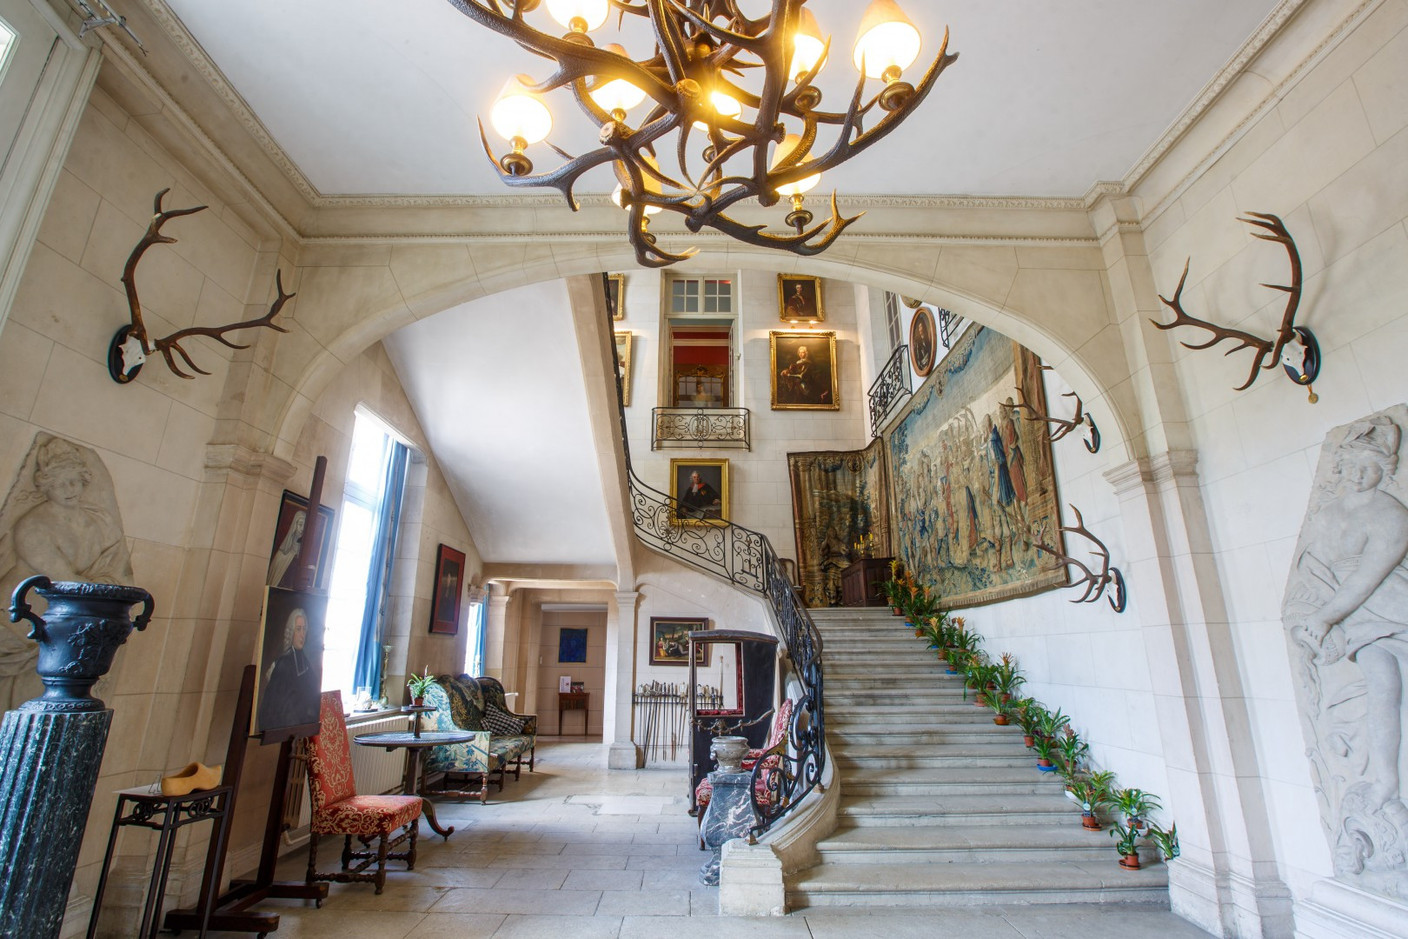 The beautiful staircase leading to the upper floors. (Photo: Château de Lagrange)